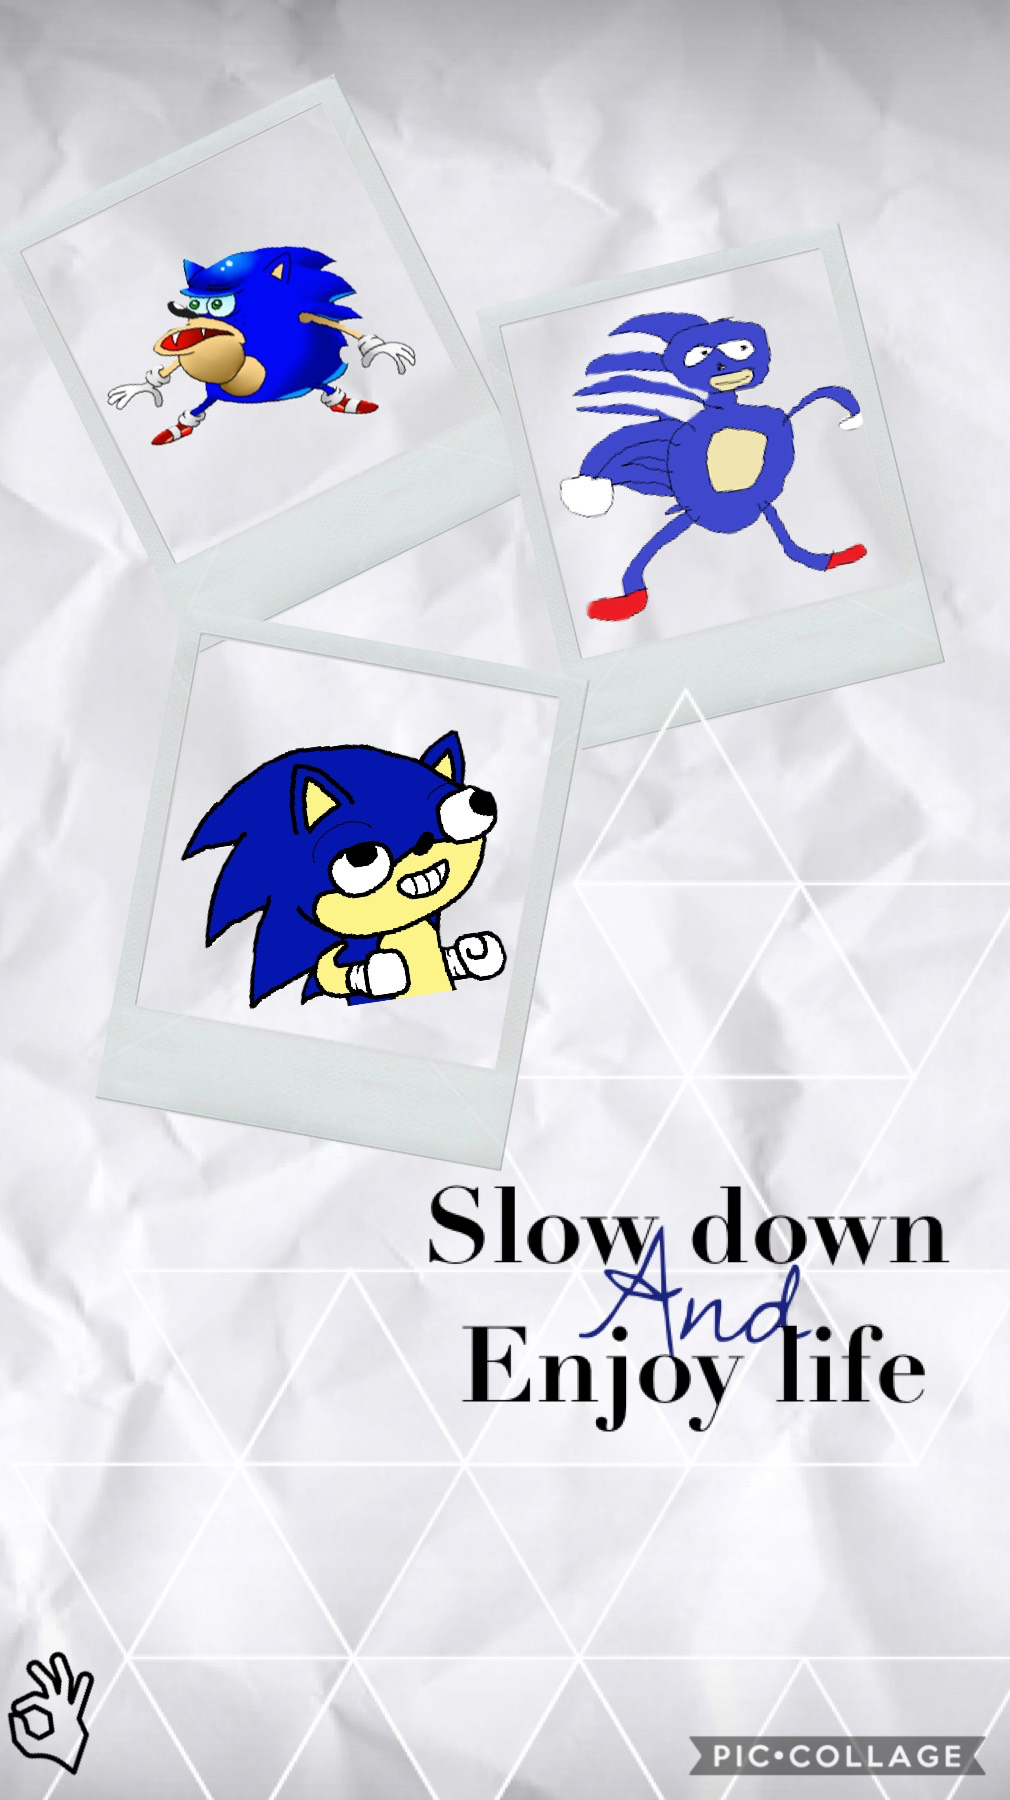 ❄️Tap❄️
Sonic is hot